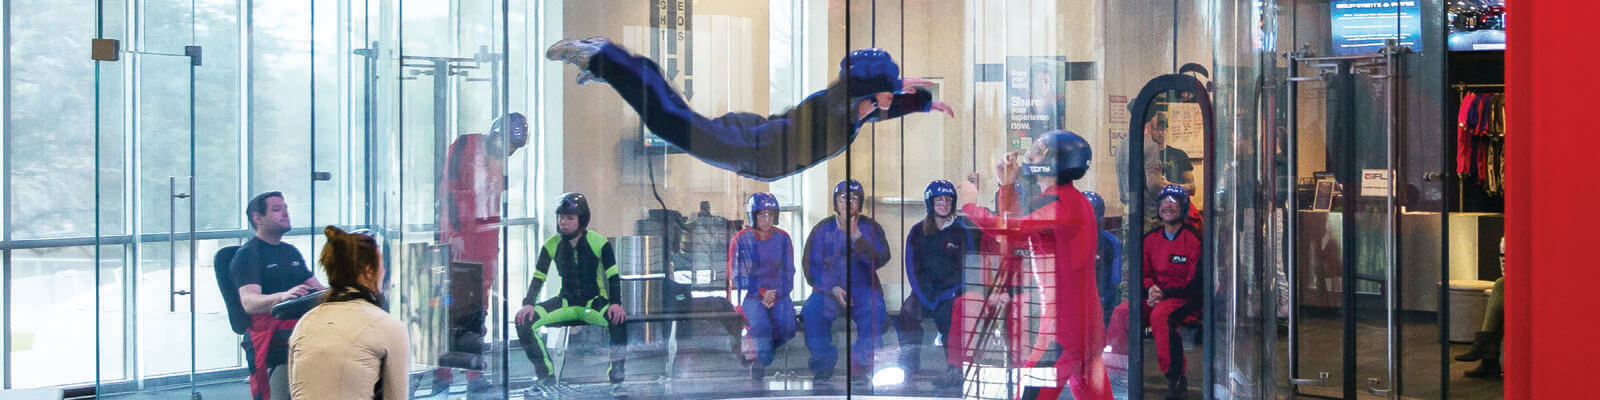 iFLY Dallas Coupons